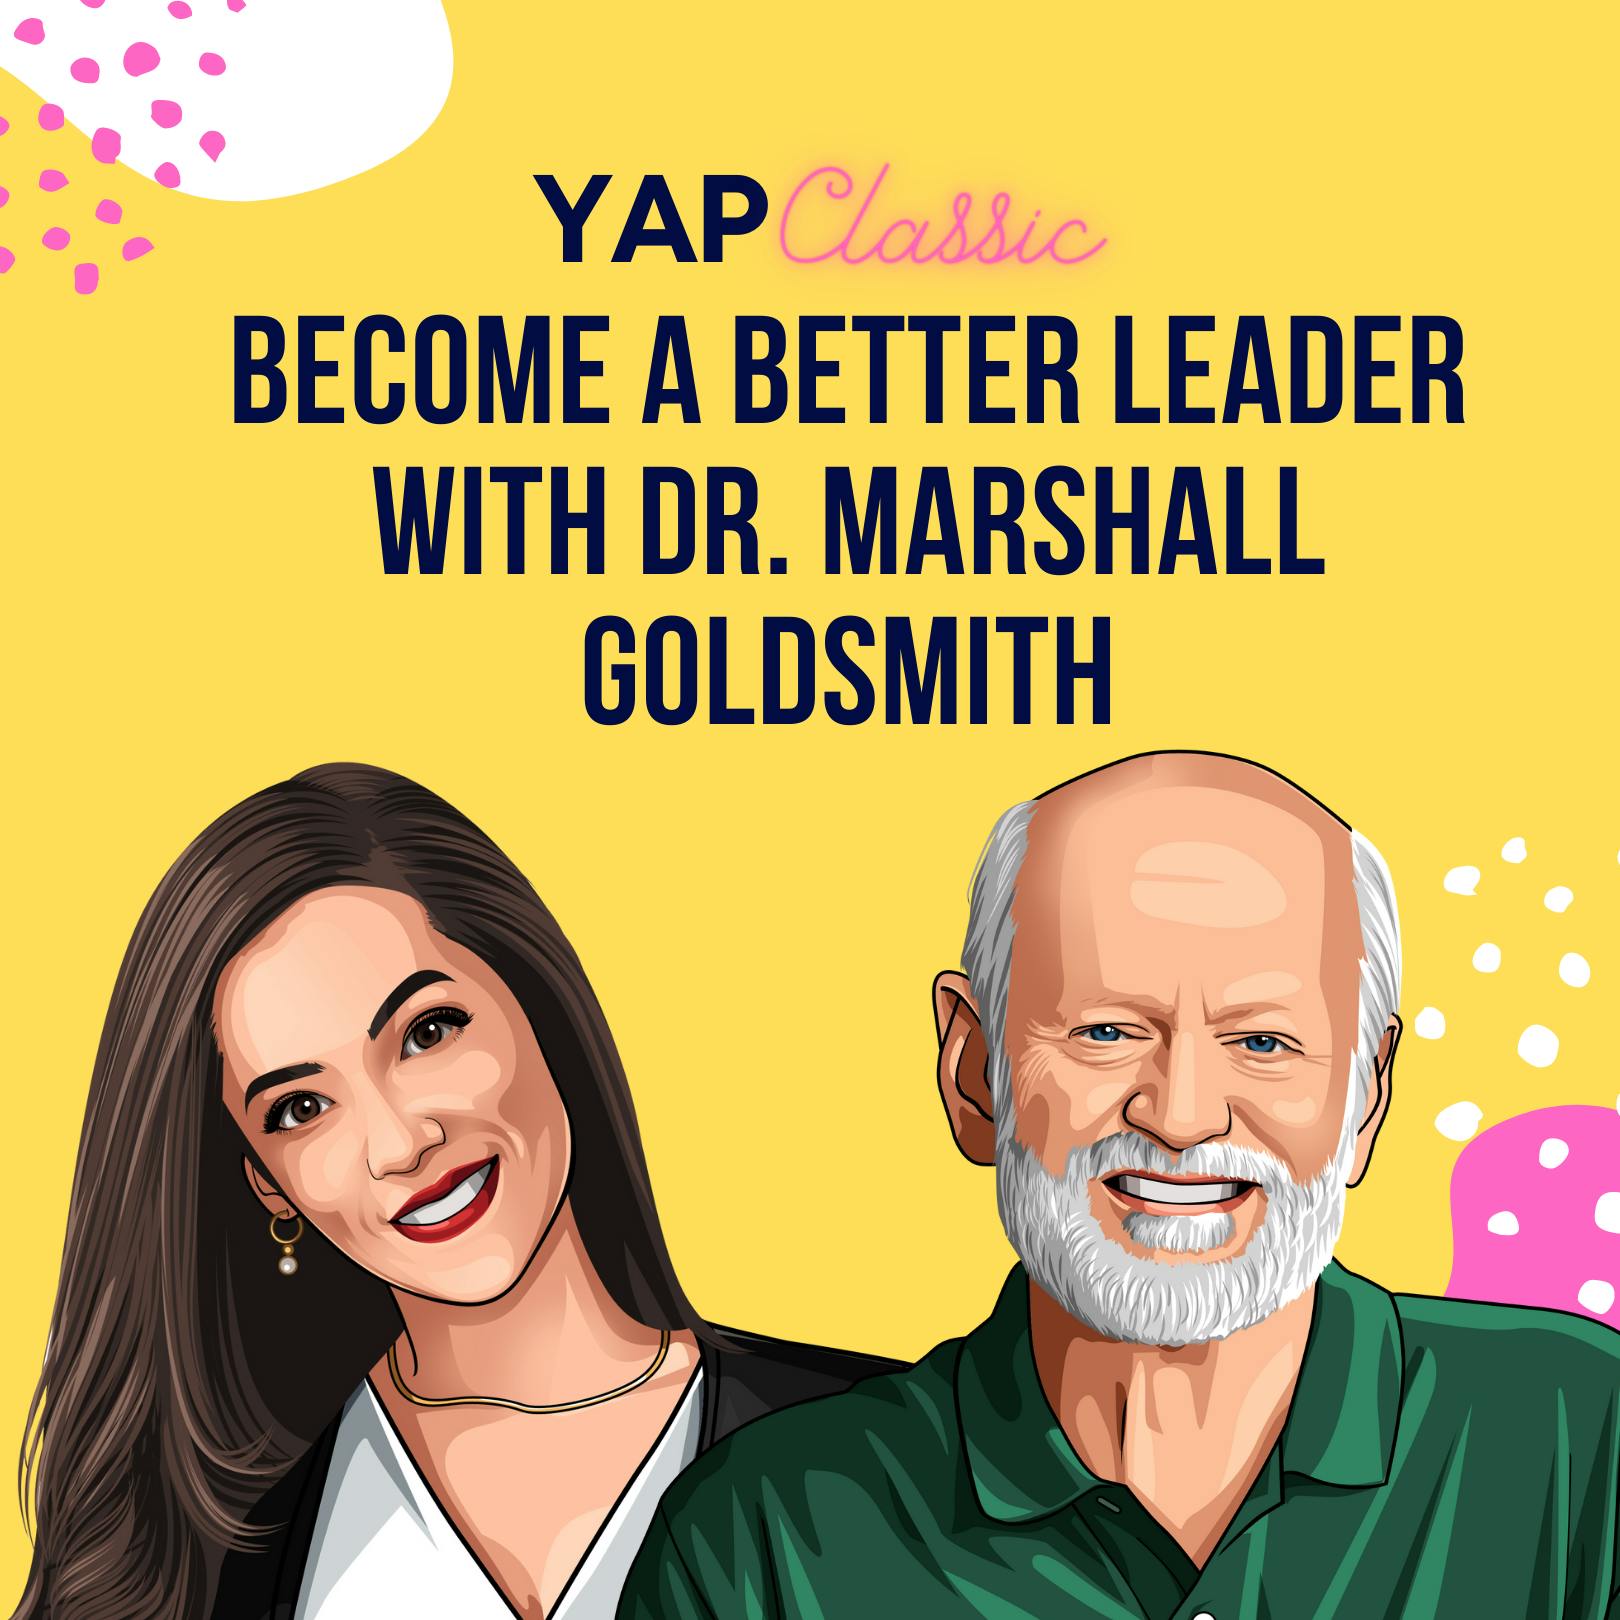 YAPClassic: Dr. Marshall Goldsmith on Becoming a Better Leader